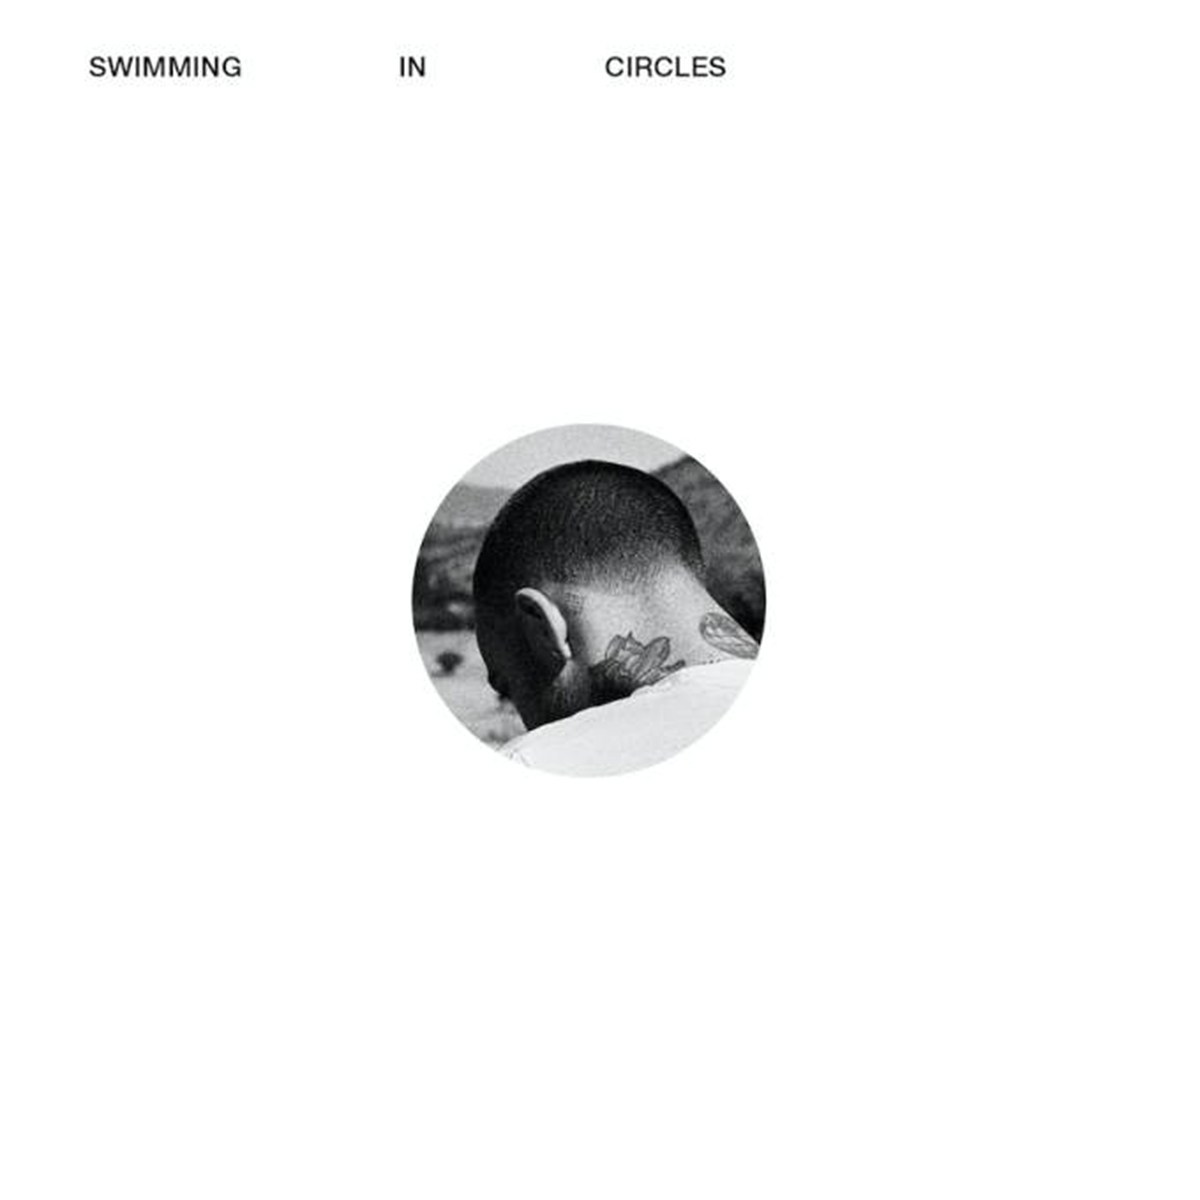 Mac Miller's Swimming and Circles collected new box